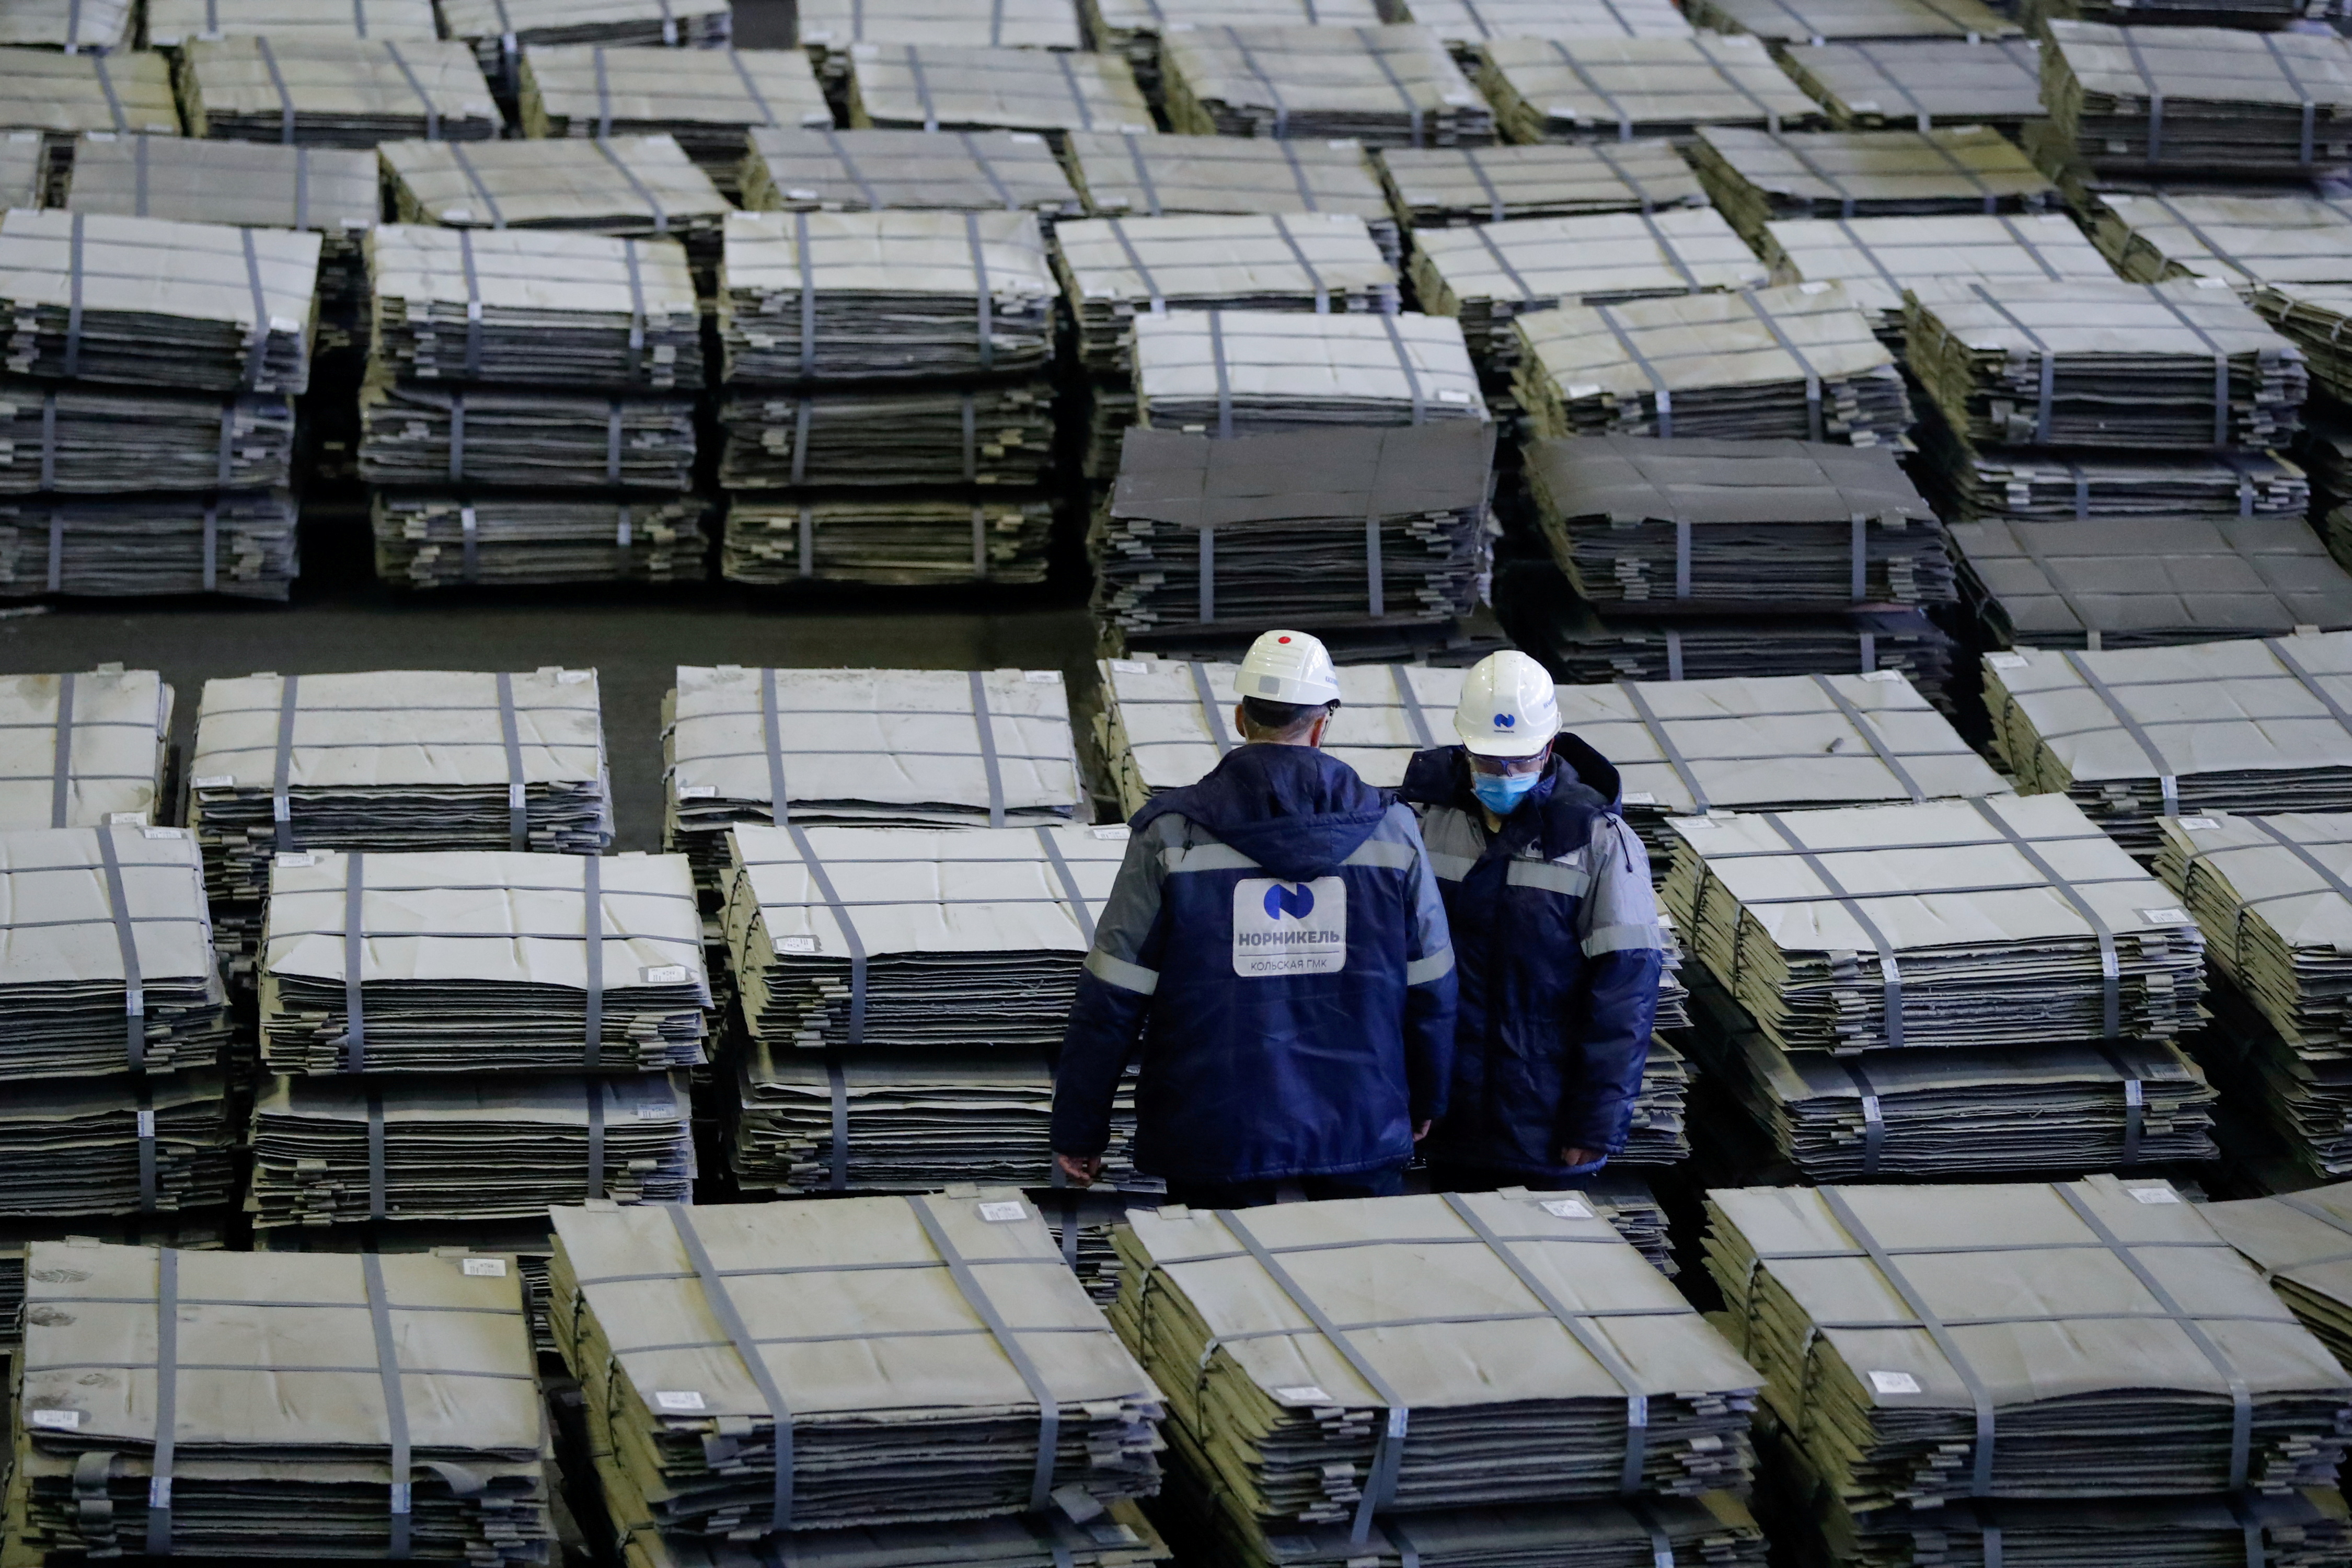 A view shows nickel sheets at Kola Mining and Metallurgical Company in Monchegorsk